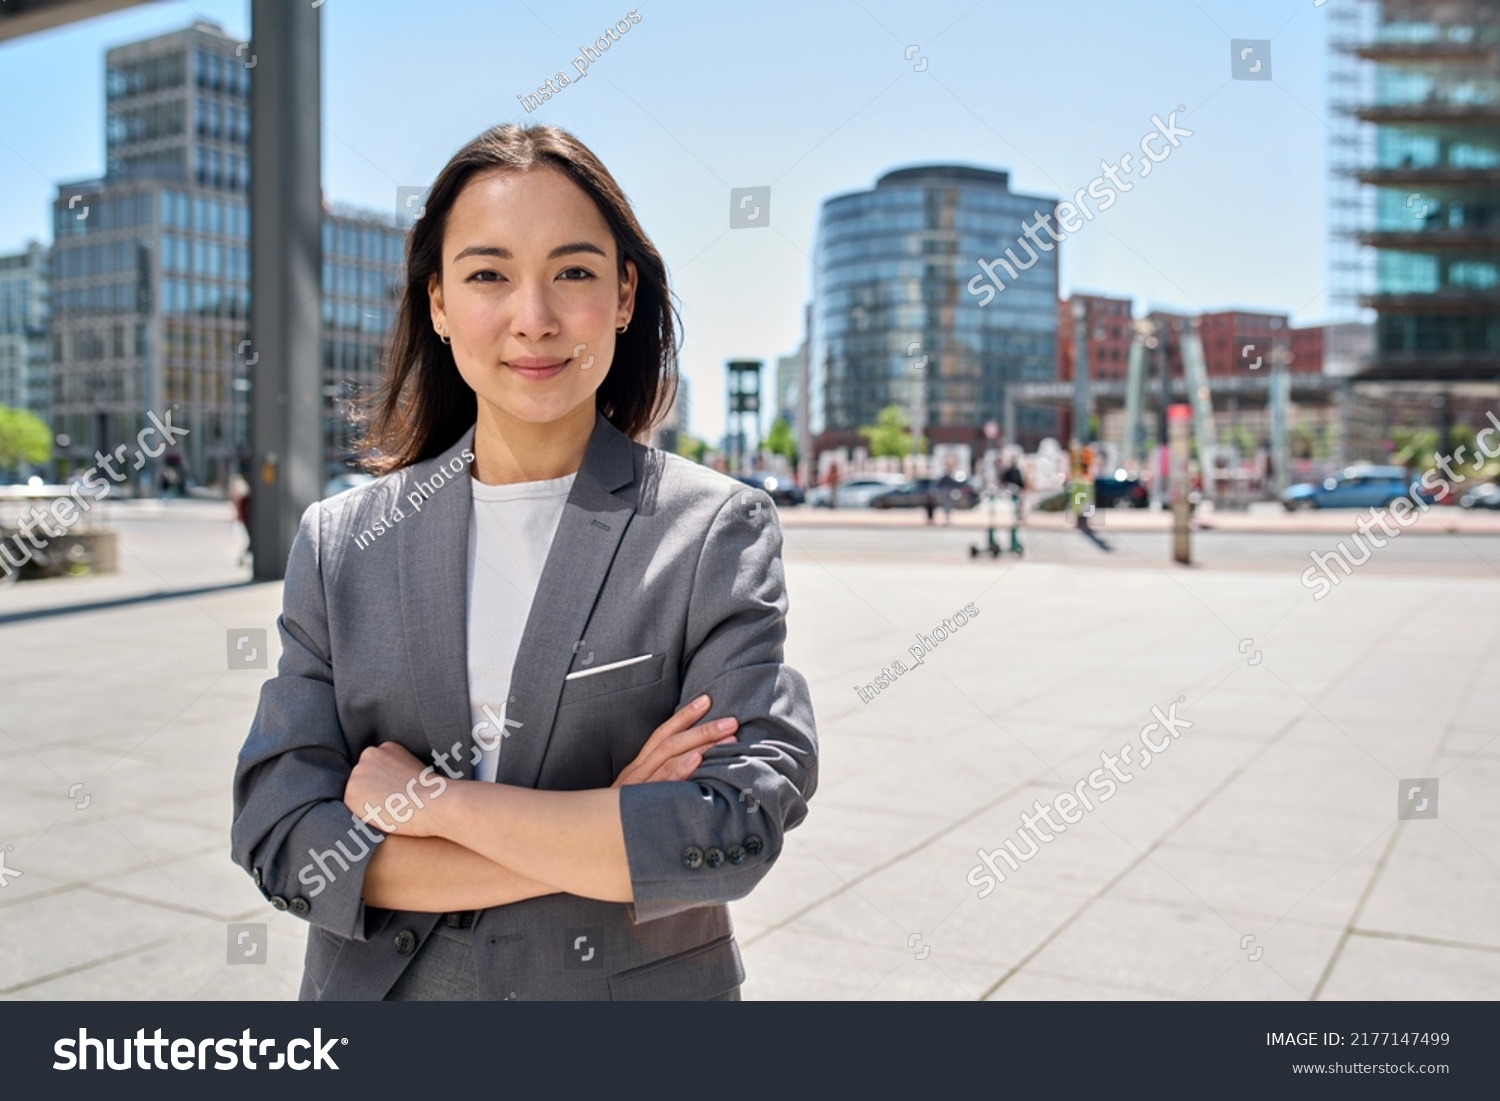 Young confident smiling Asian business woman standing on busy street, portrait. Proud successful female entrepreneur wearing suit posing with arms crossed looking at camera in big city outdoors. #2177147499